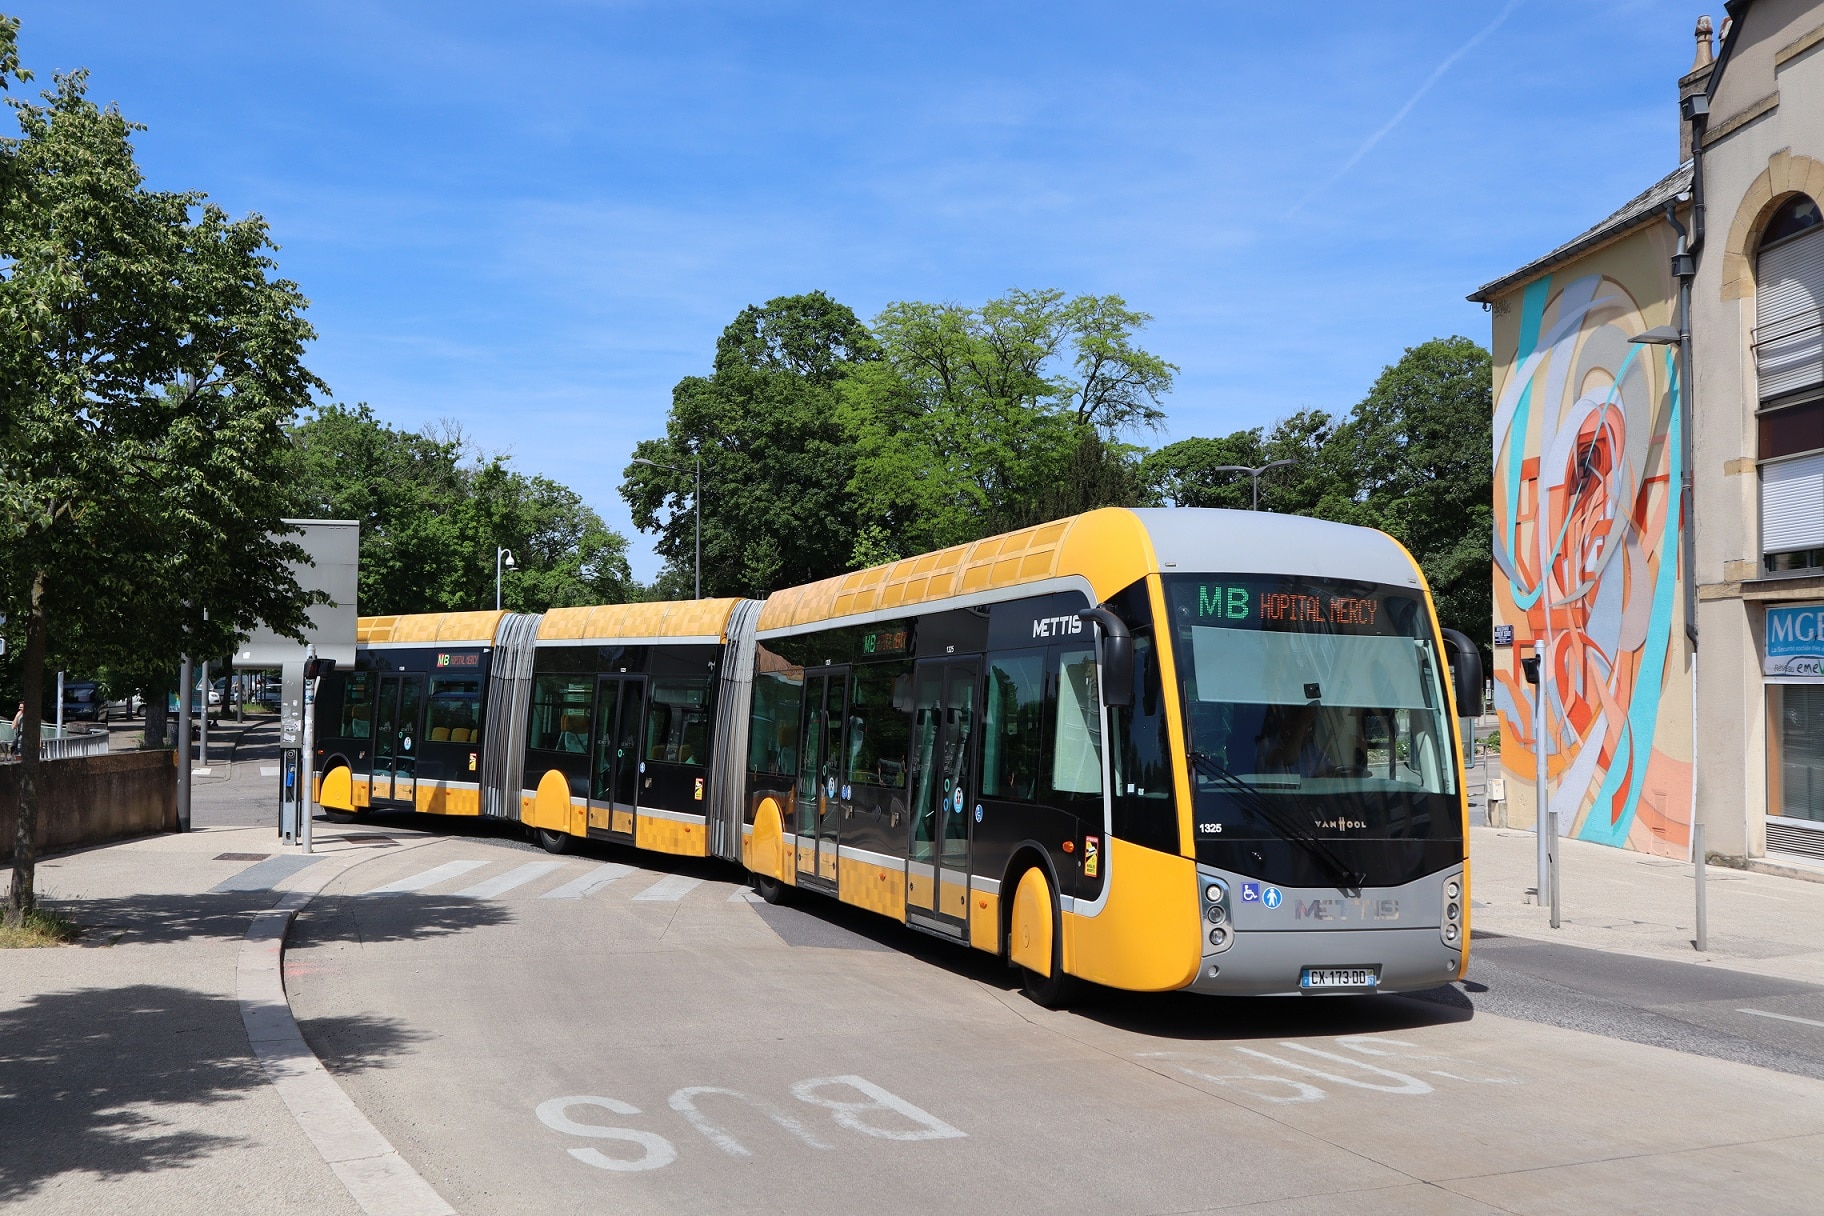 24m articulated buses first hoped for Sprint BRT